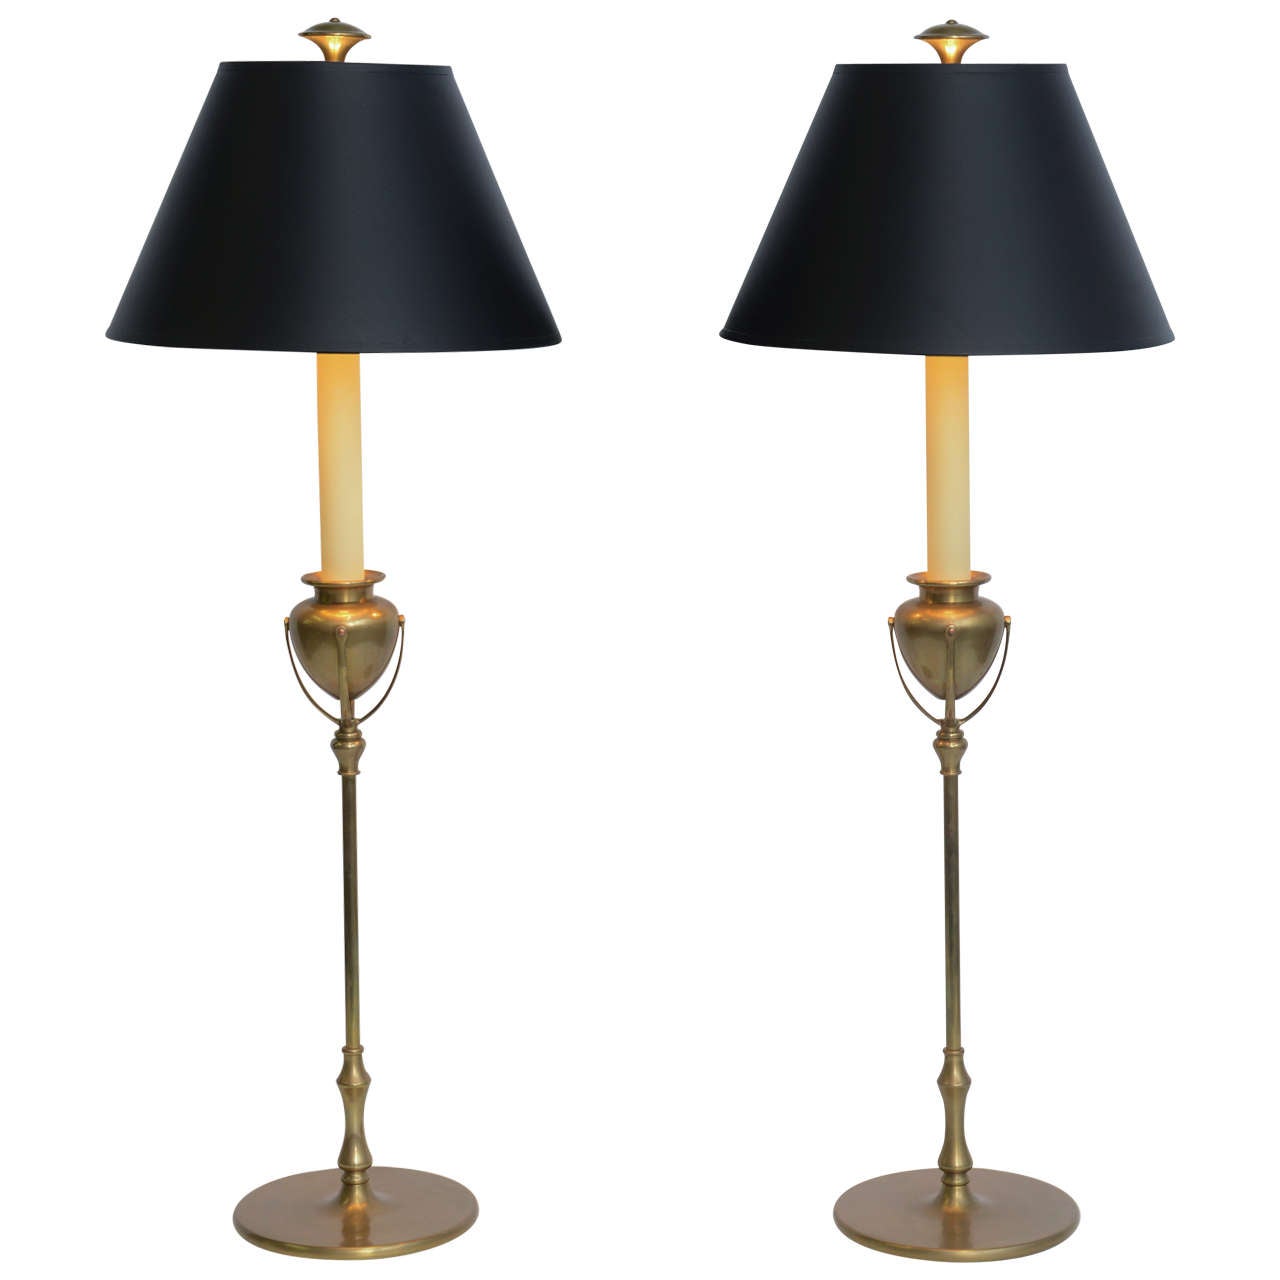 Tiffany Style Large Chapman Brass Candlestick Table Lamps